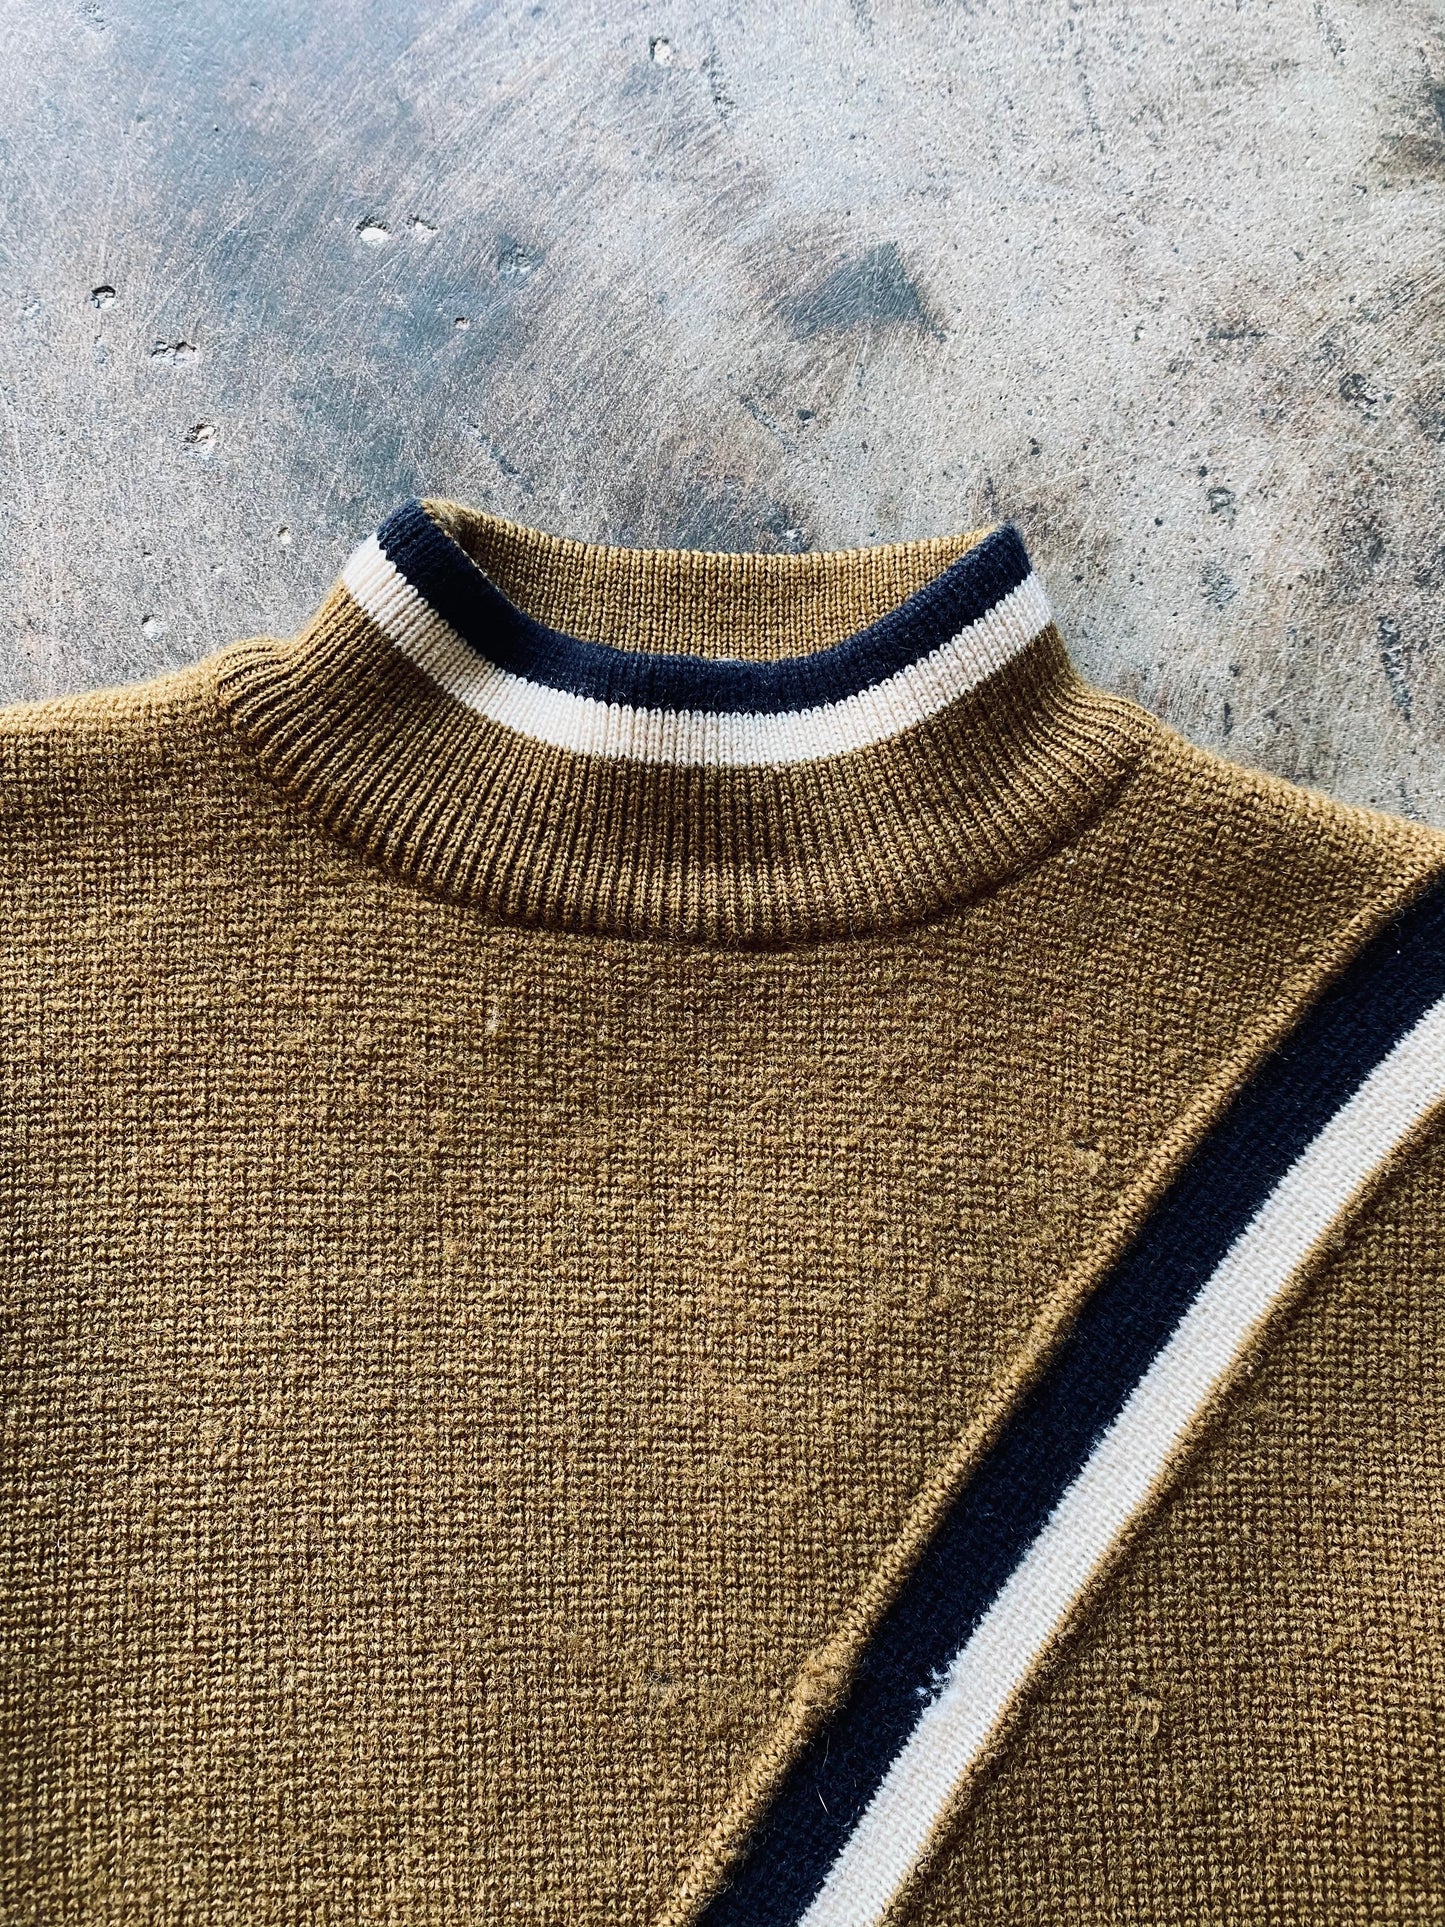 1960s White Stag Mod Knit Sweater